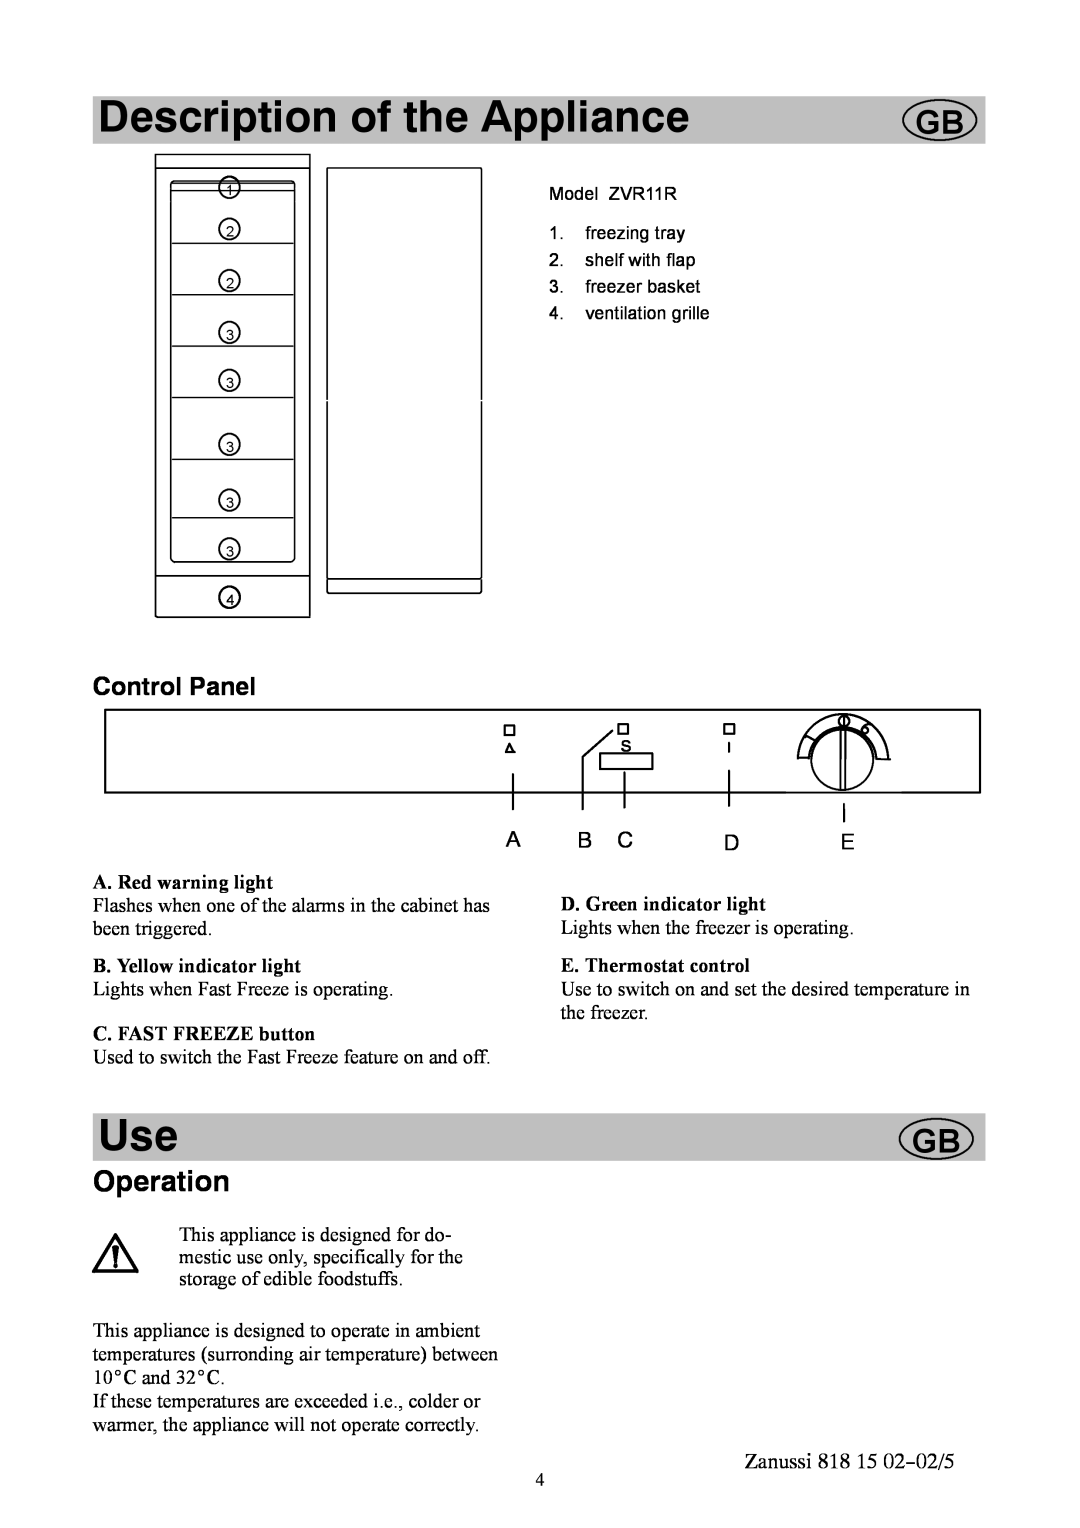 Zanussi ZVR11R Description of the Appliance, Operation, Control Panel, A. Red warning light, B. Yellow indicator light 